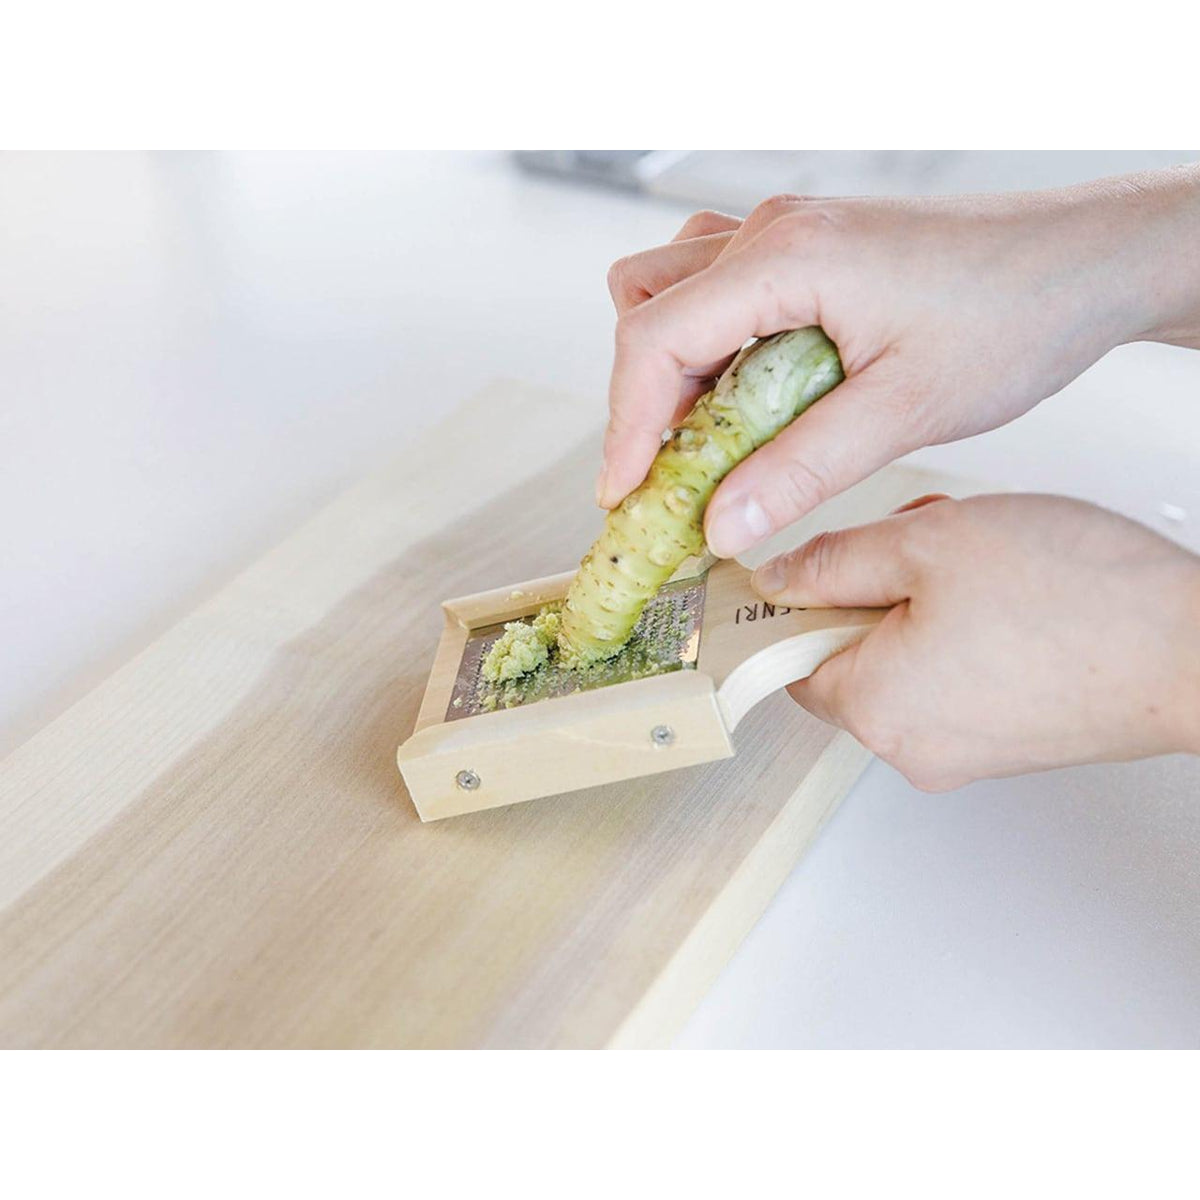 Ceramic Grater - Save your fingers when grating garlic, ginger, wassabi,  and more!